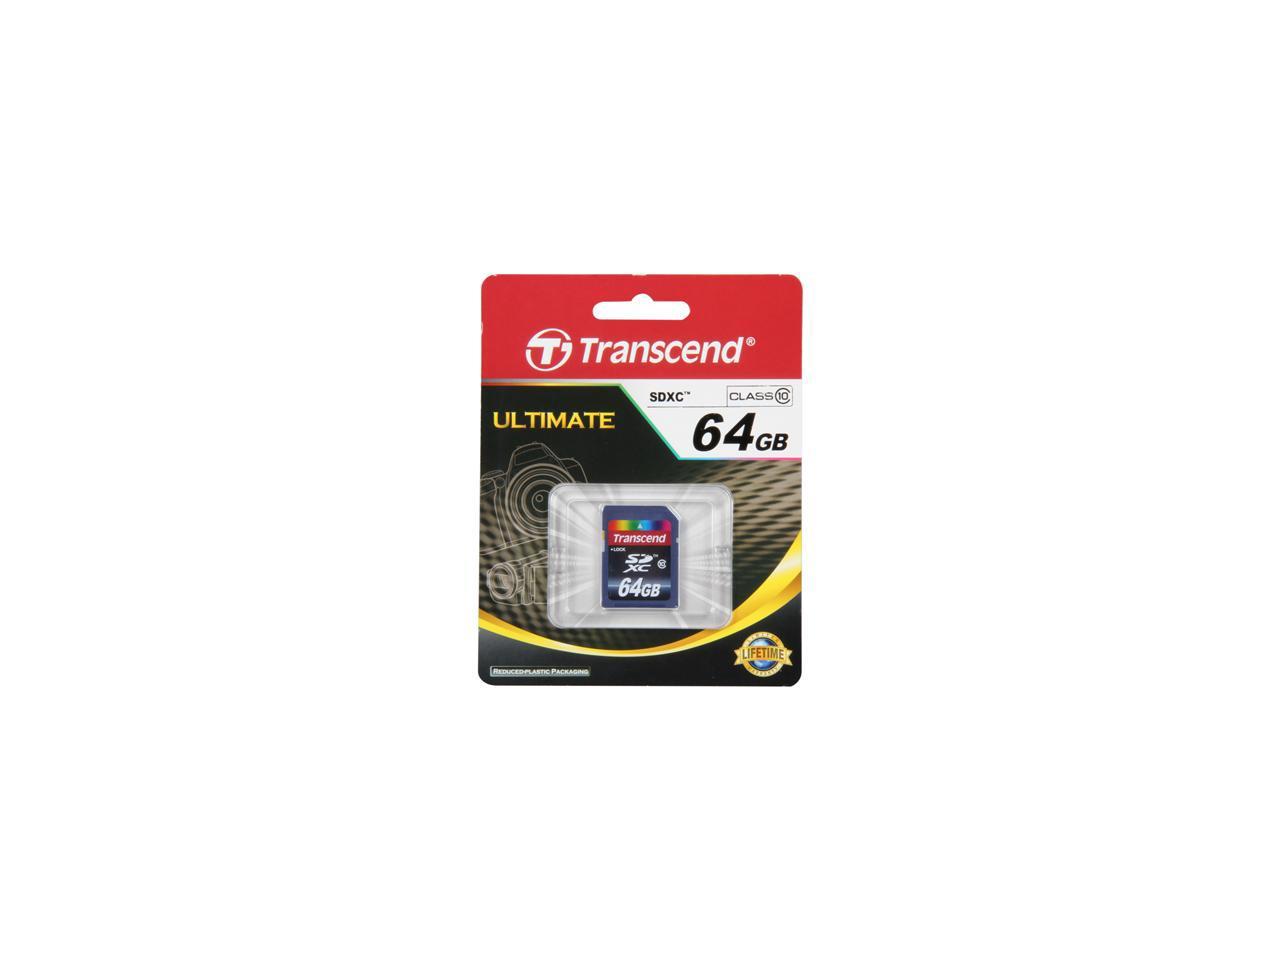 Transcend 64GB Secure Digital Extended Capacity (SDXC) Flash Card Model TS64GSDXC10